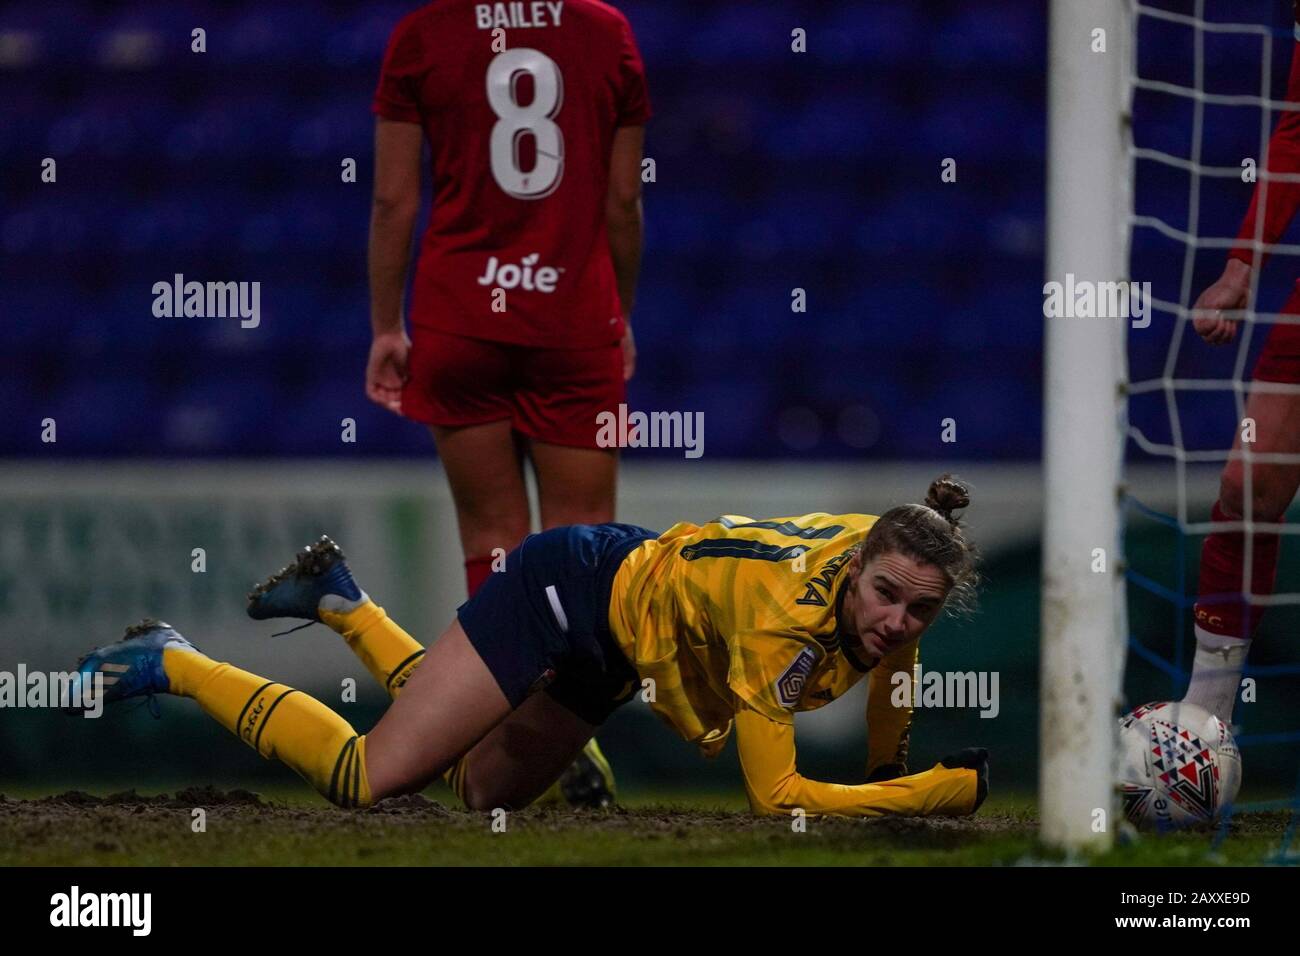 CHESTER. ENGLAND. FEB 13th: Vivianne Miedema of Arsenal scores the winning goal  during the Women’s Super League game between Liverpool Women and Arsenal Women at The Deva Stadium in Chester, England. (Photo by Daniela Porcelli/SPP) Stock Photo